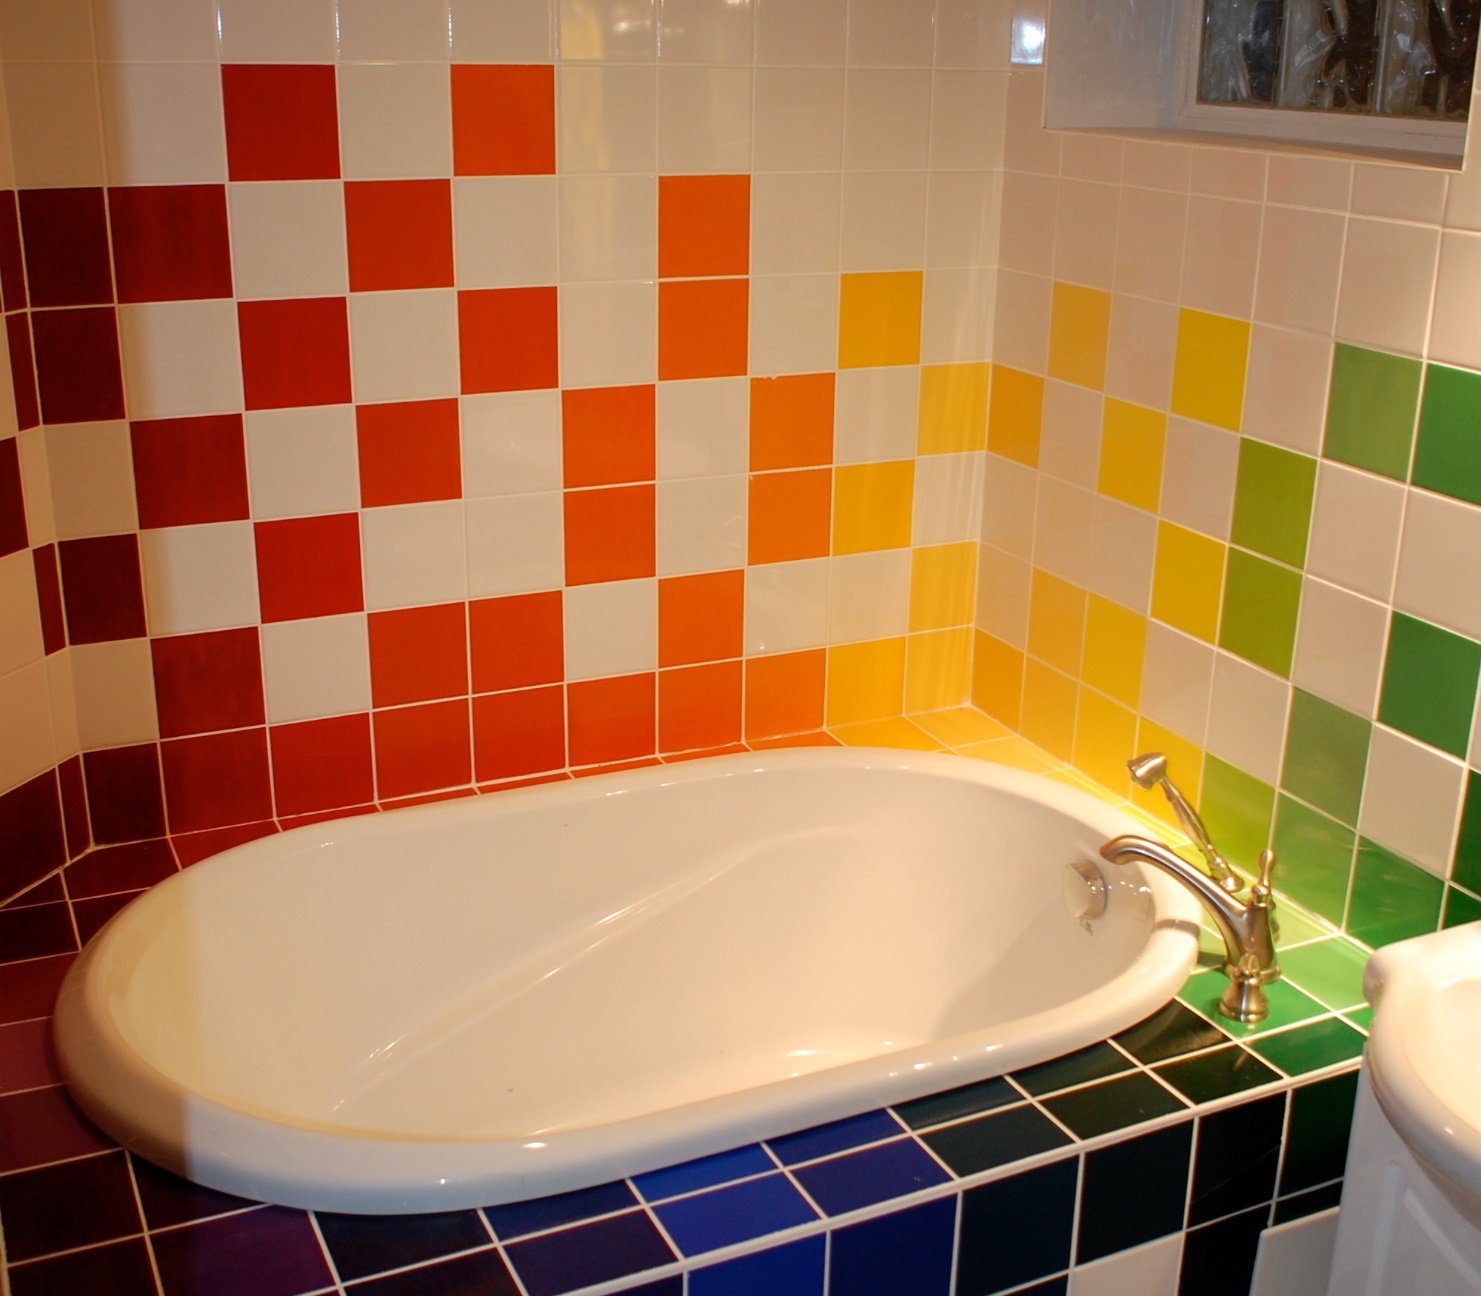 An example of a bright bathroom interior in Khrushchev